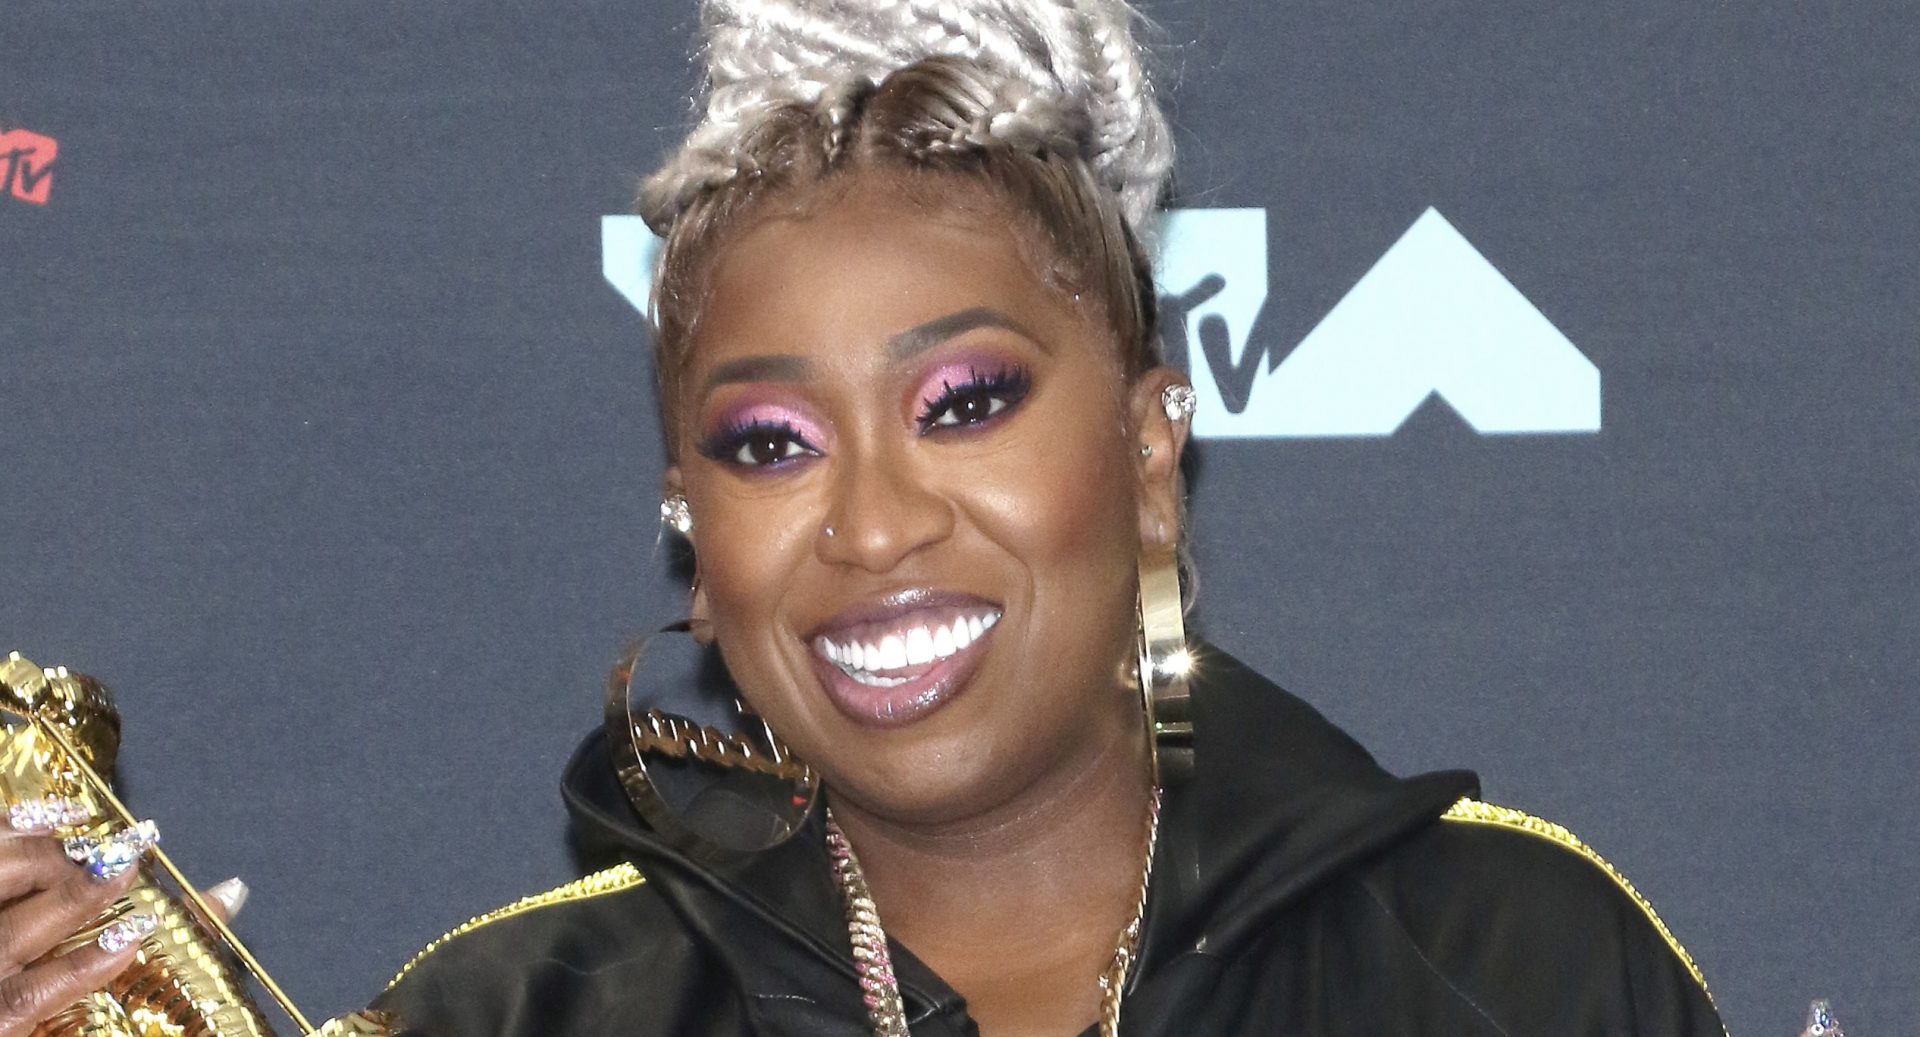 Missy Elliott Reflects On Her Career Ahead Of Rock & Roll Hall Of Fame Induction Ceremony